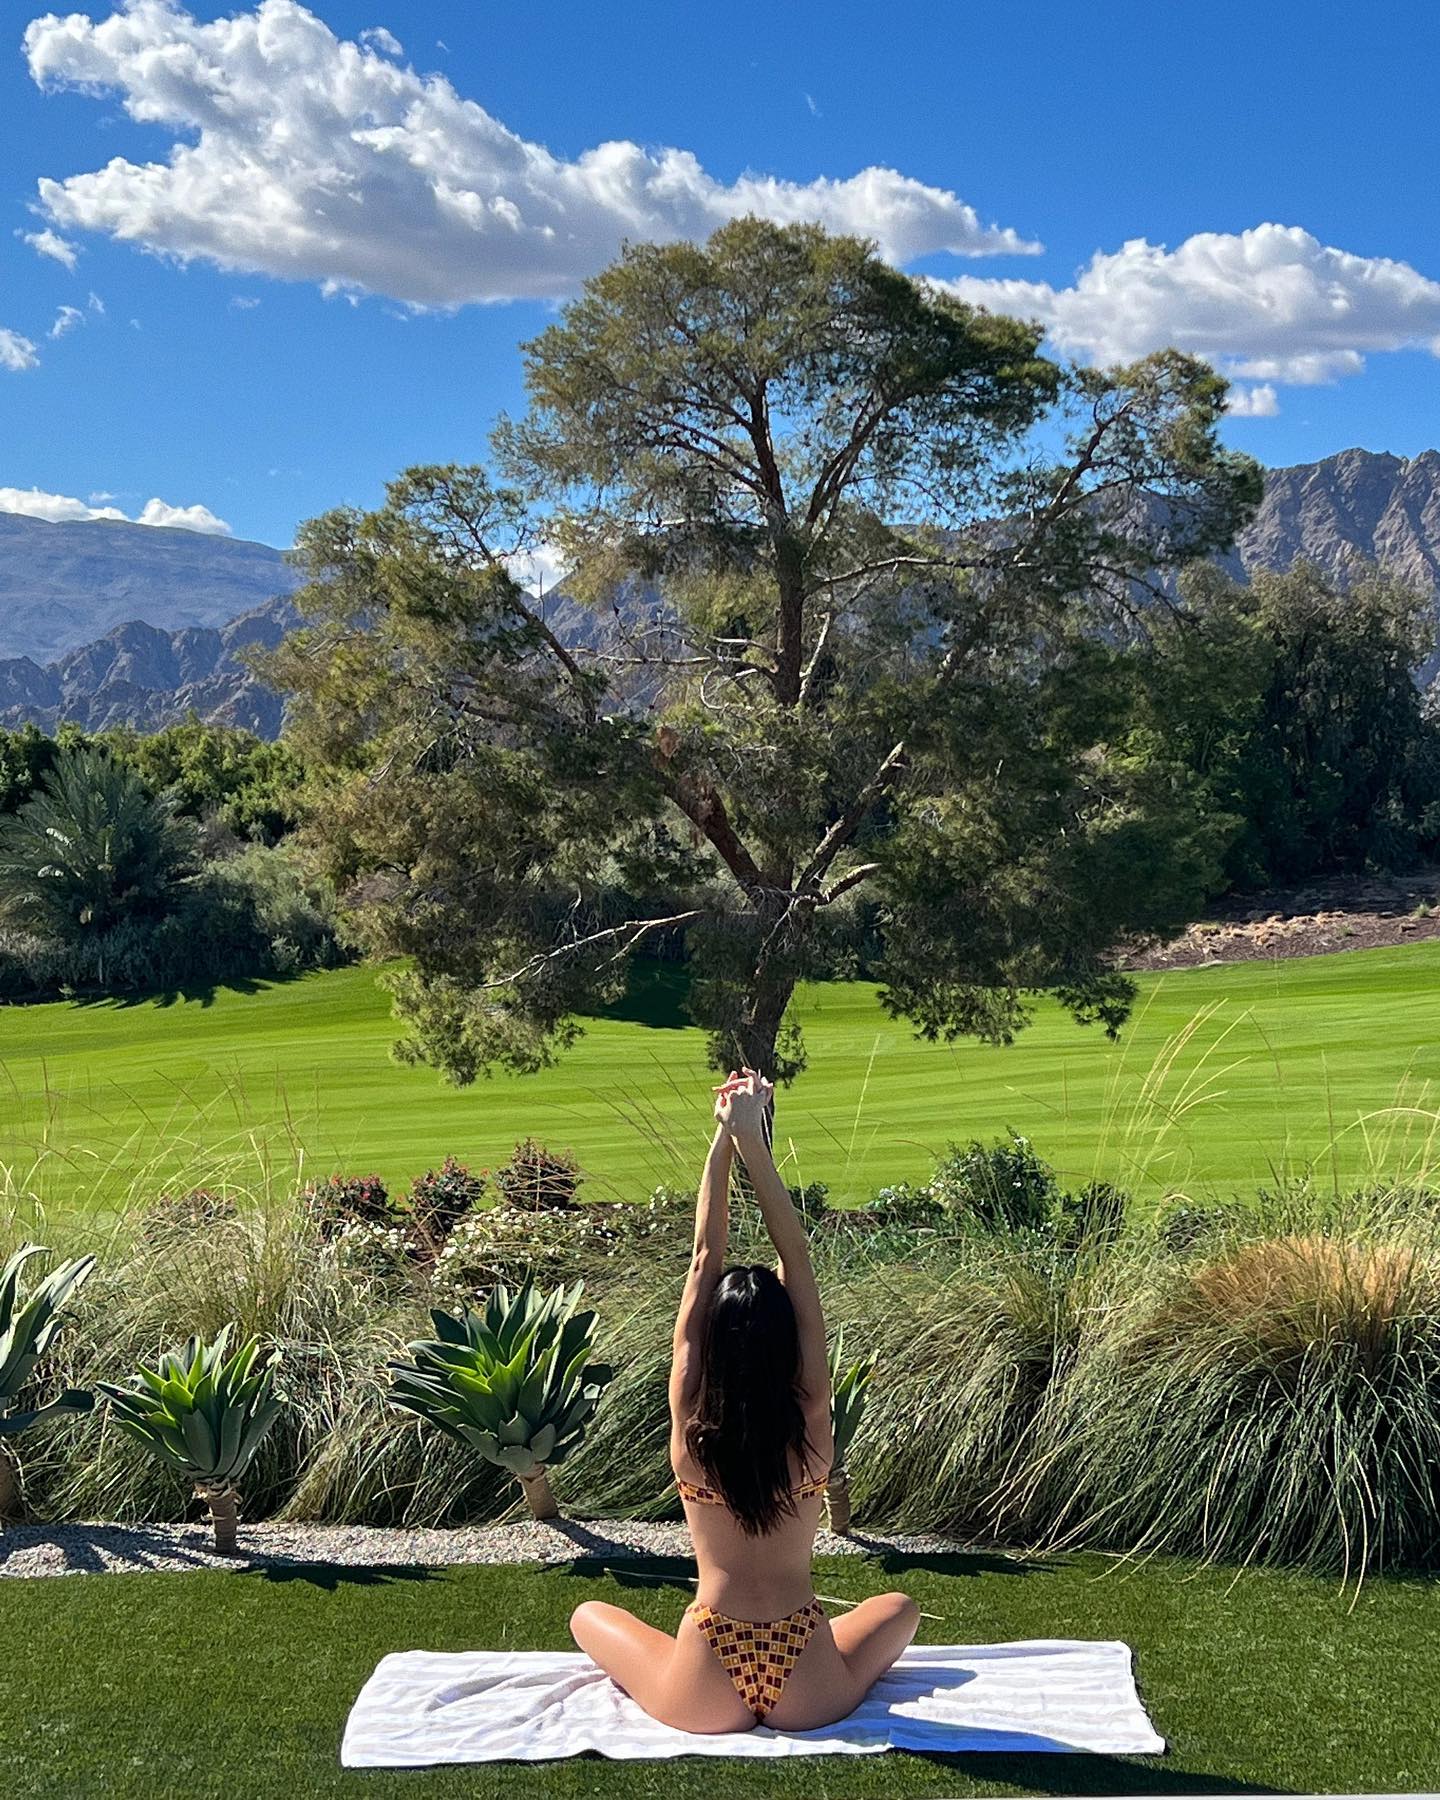 PIC] Kendall Jenner's Sexy Instagram — Reality Star Posts Yoga